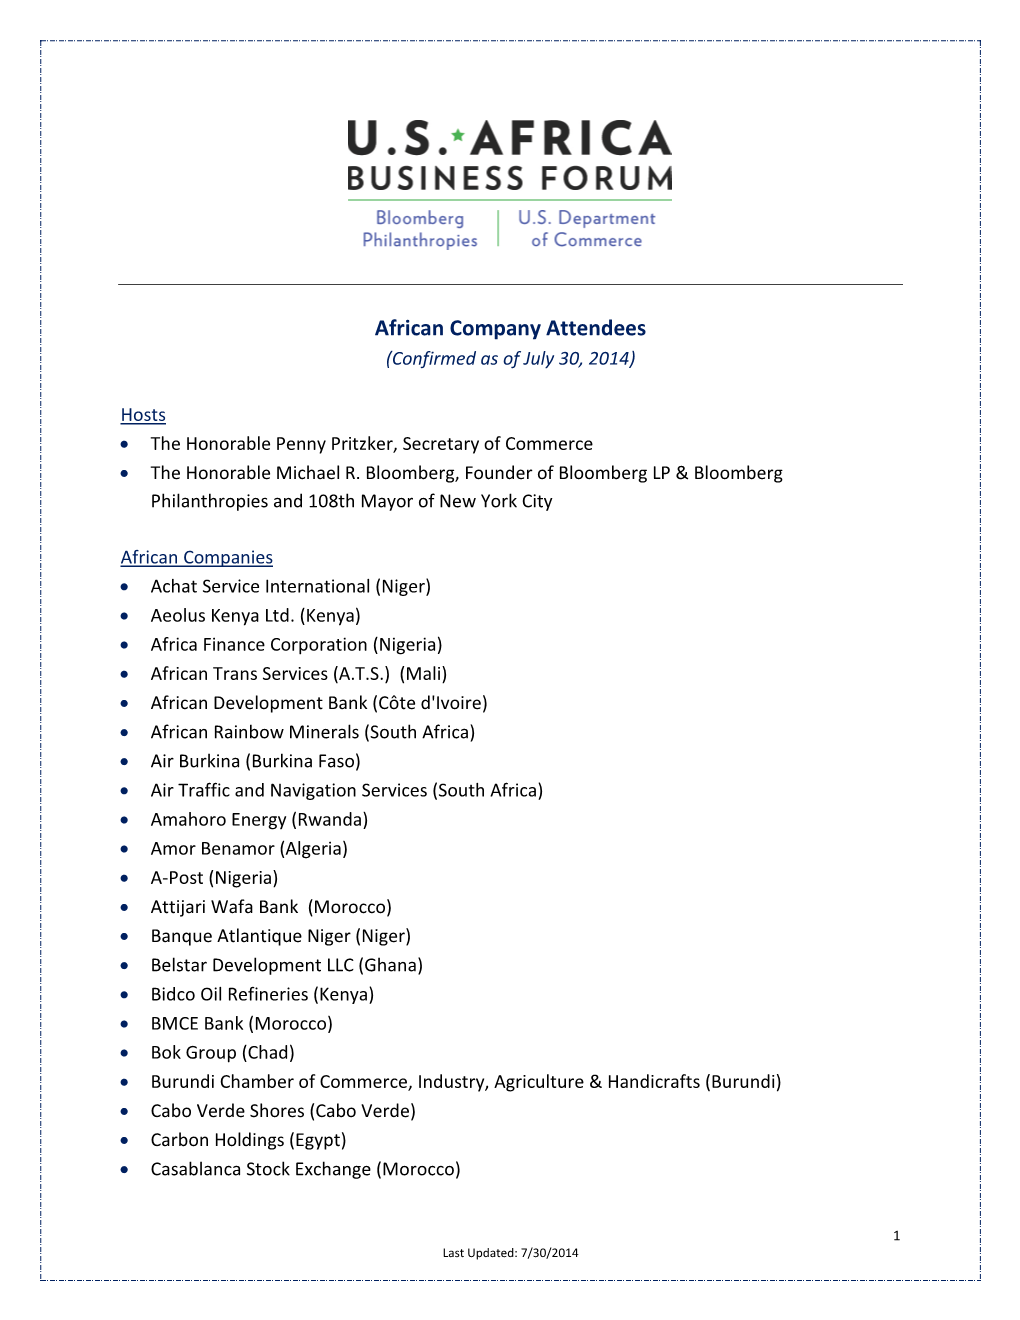 African Company Attendees (Confirmed As of July 30, 2014)